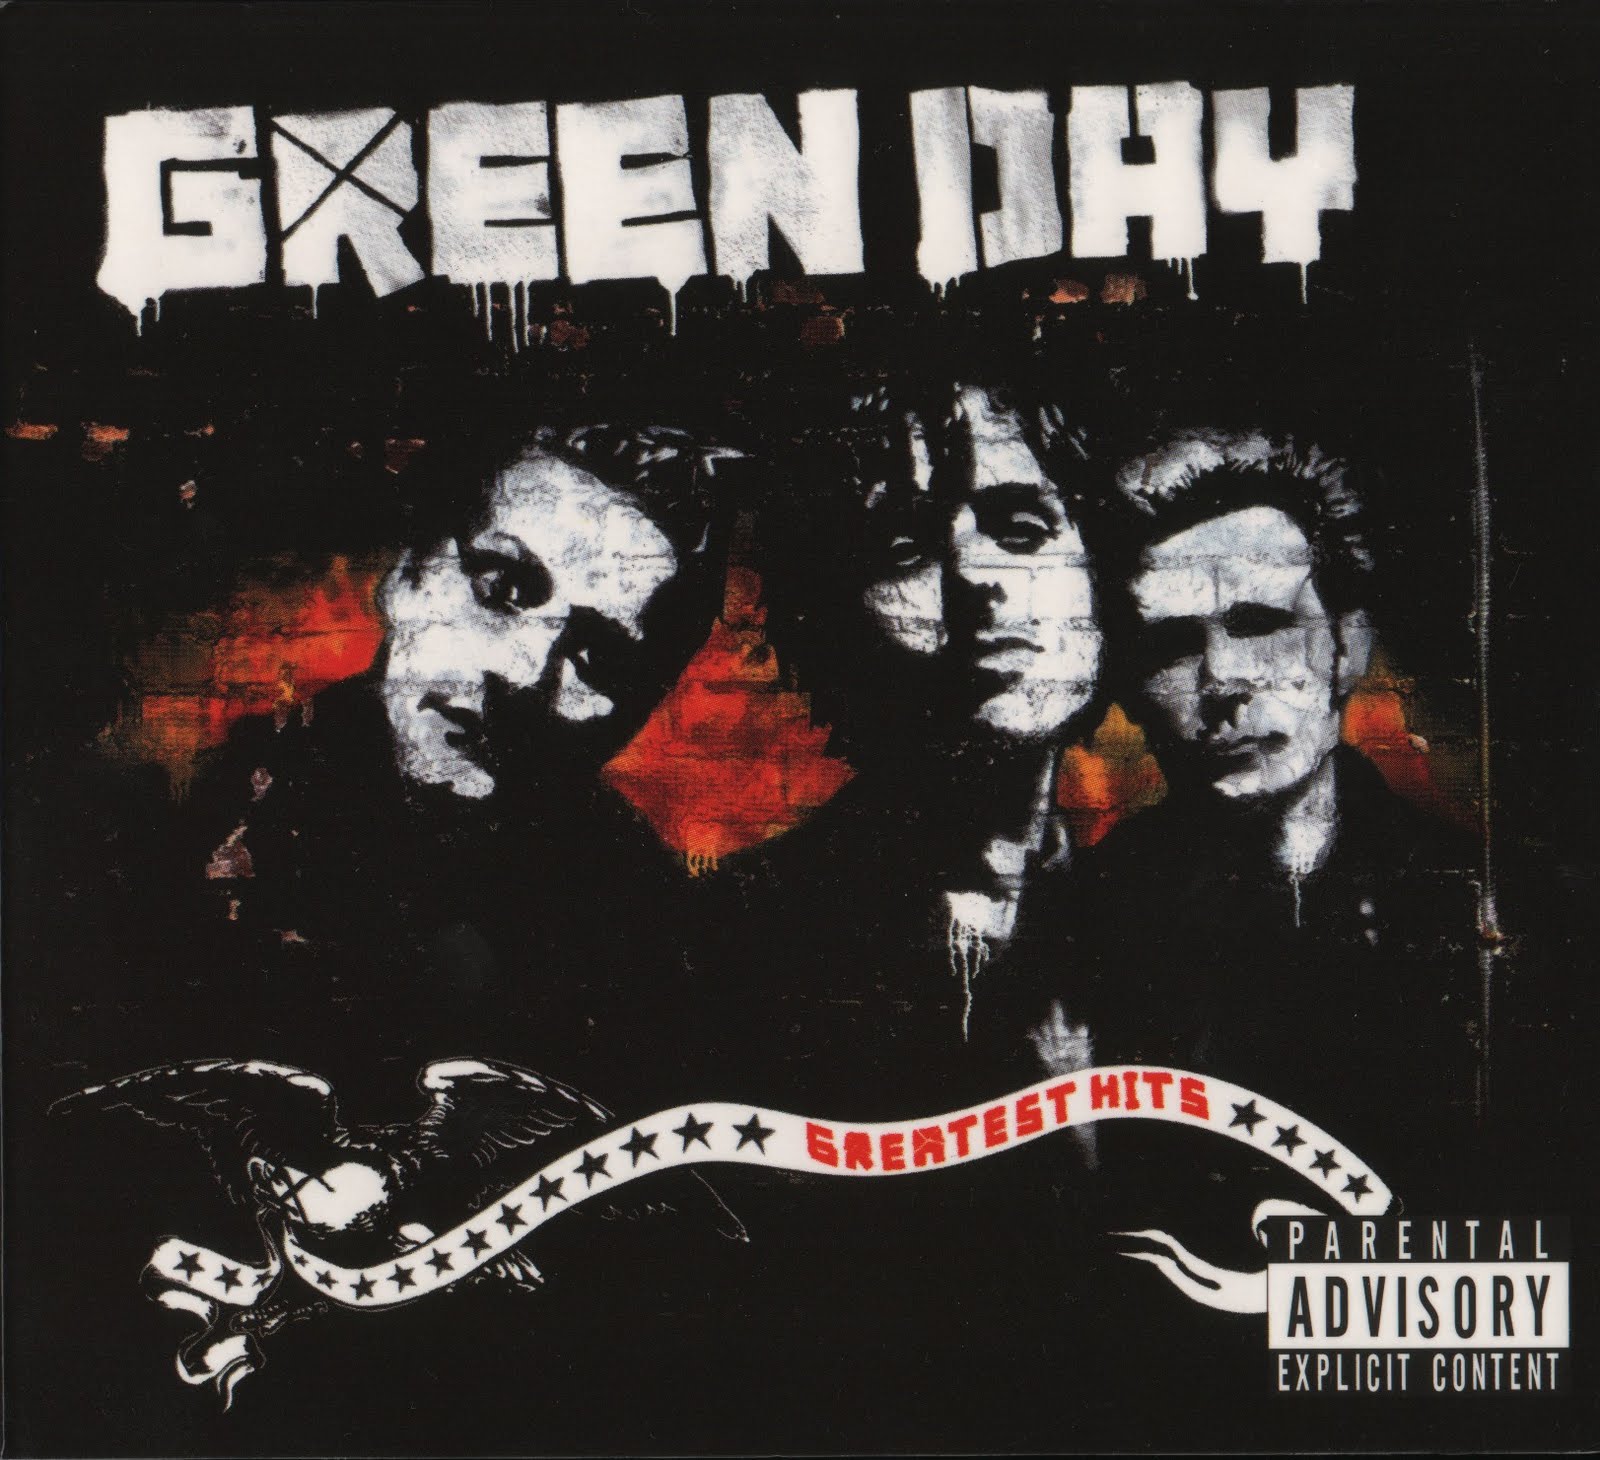 Green Day - Greatest Hits (2CD) 2010 | FULL LP DOWNLOAD1600 x 1460